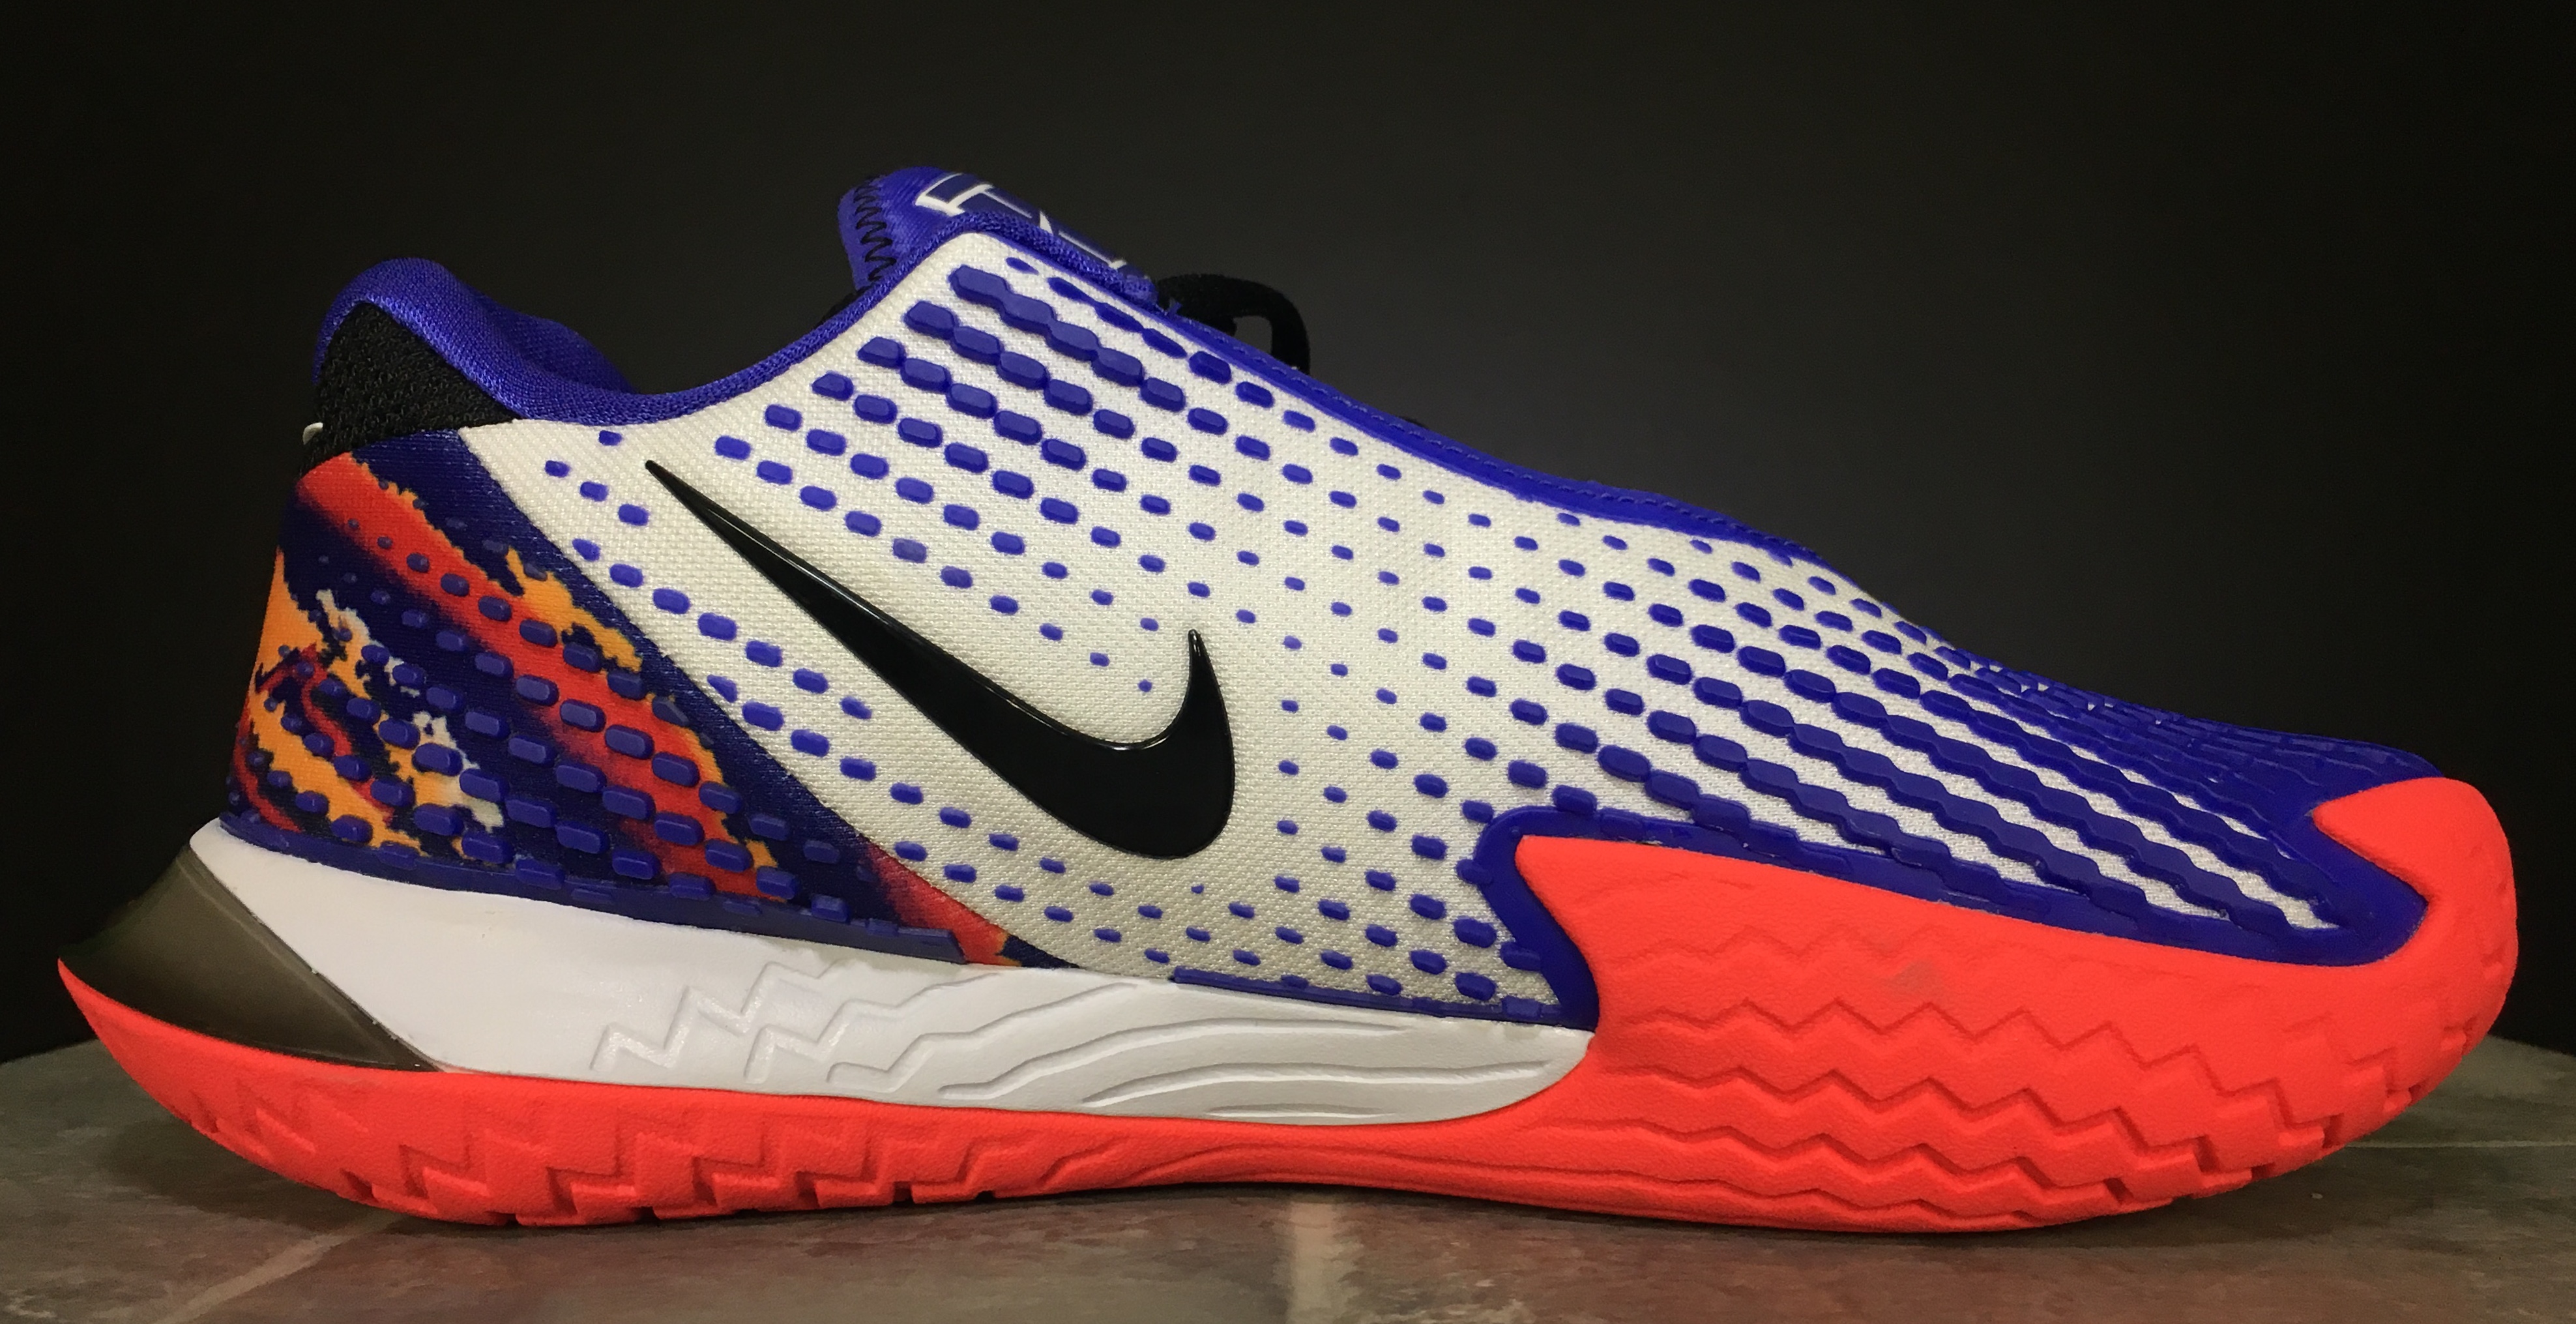 Nike Launches the Air Zoom Vapor Cage 4 | TENNIS EXPRESS BLOG